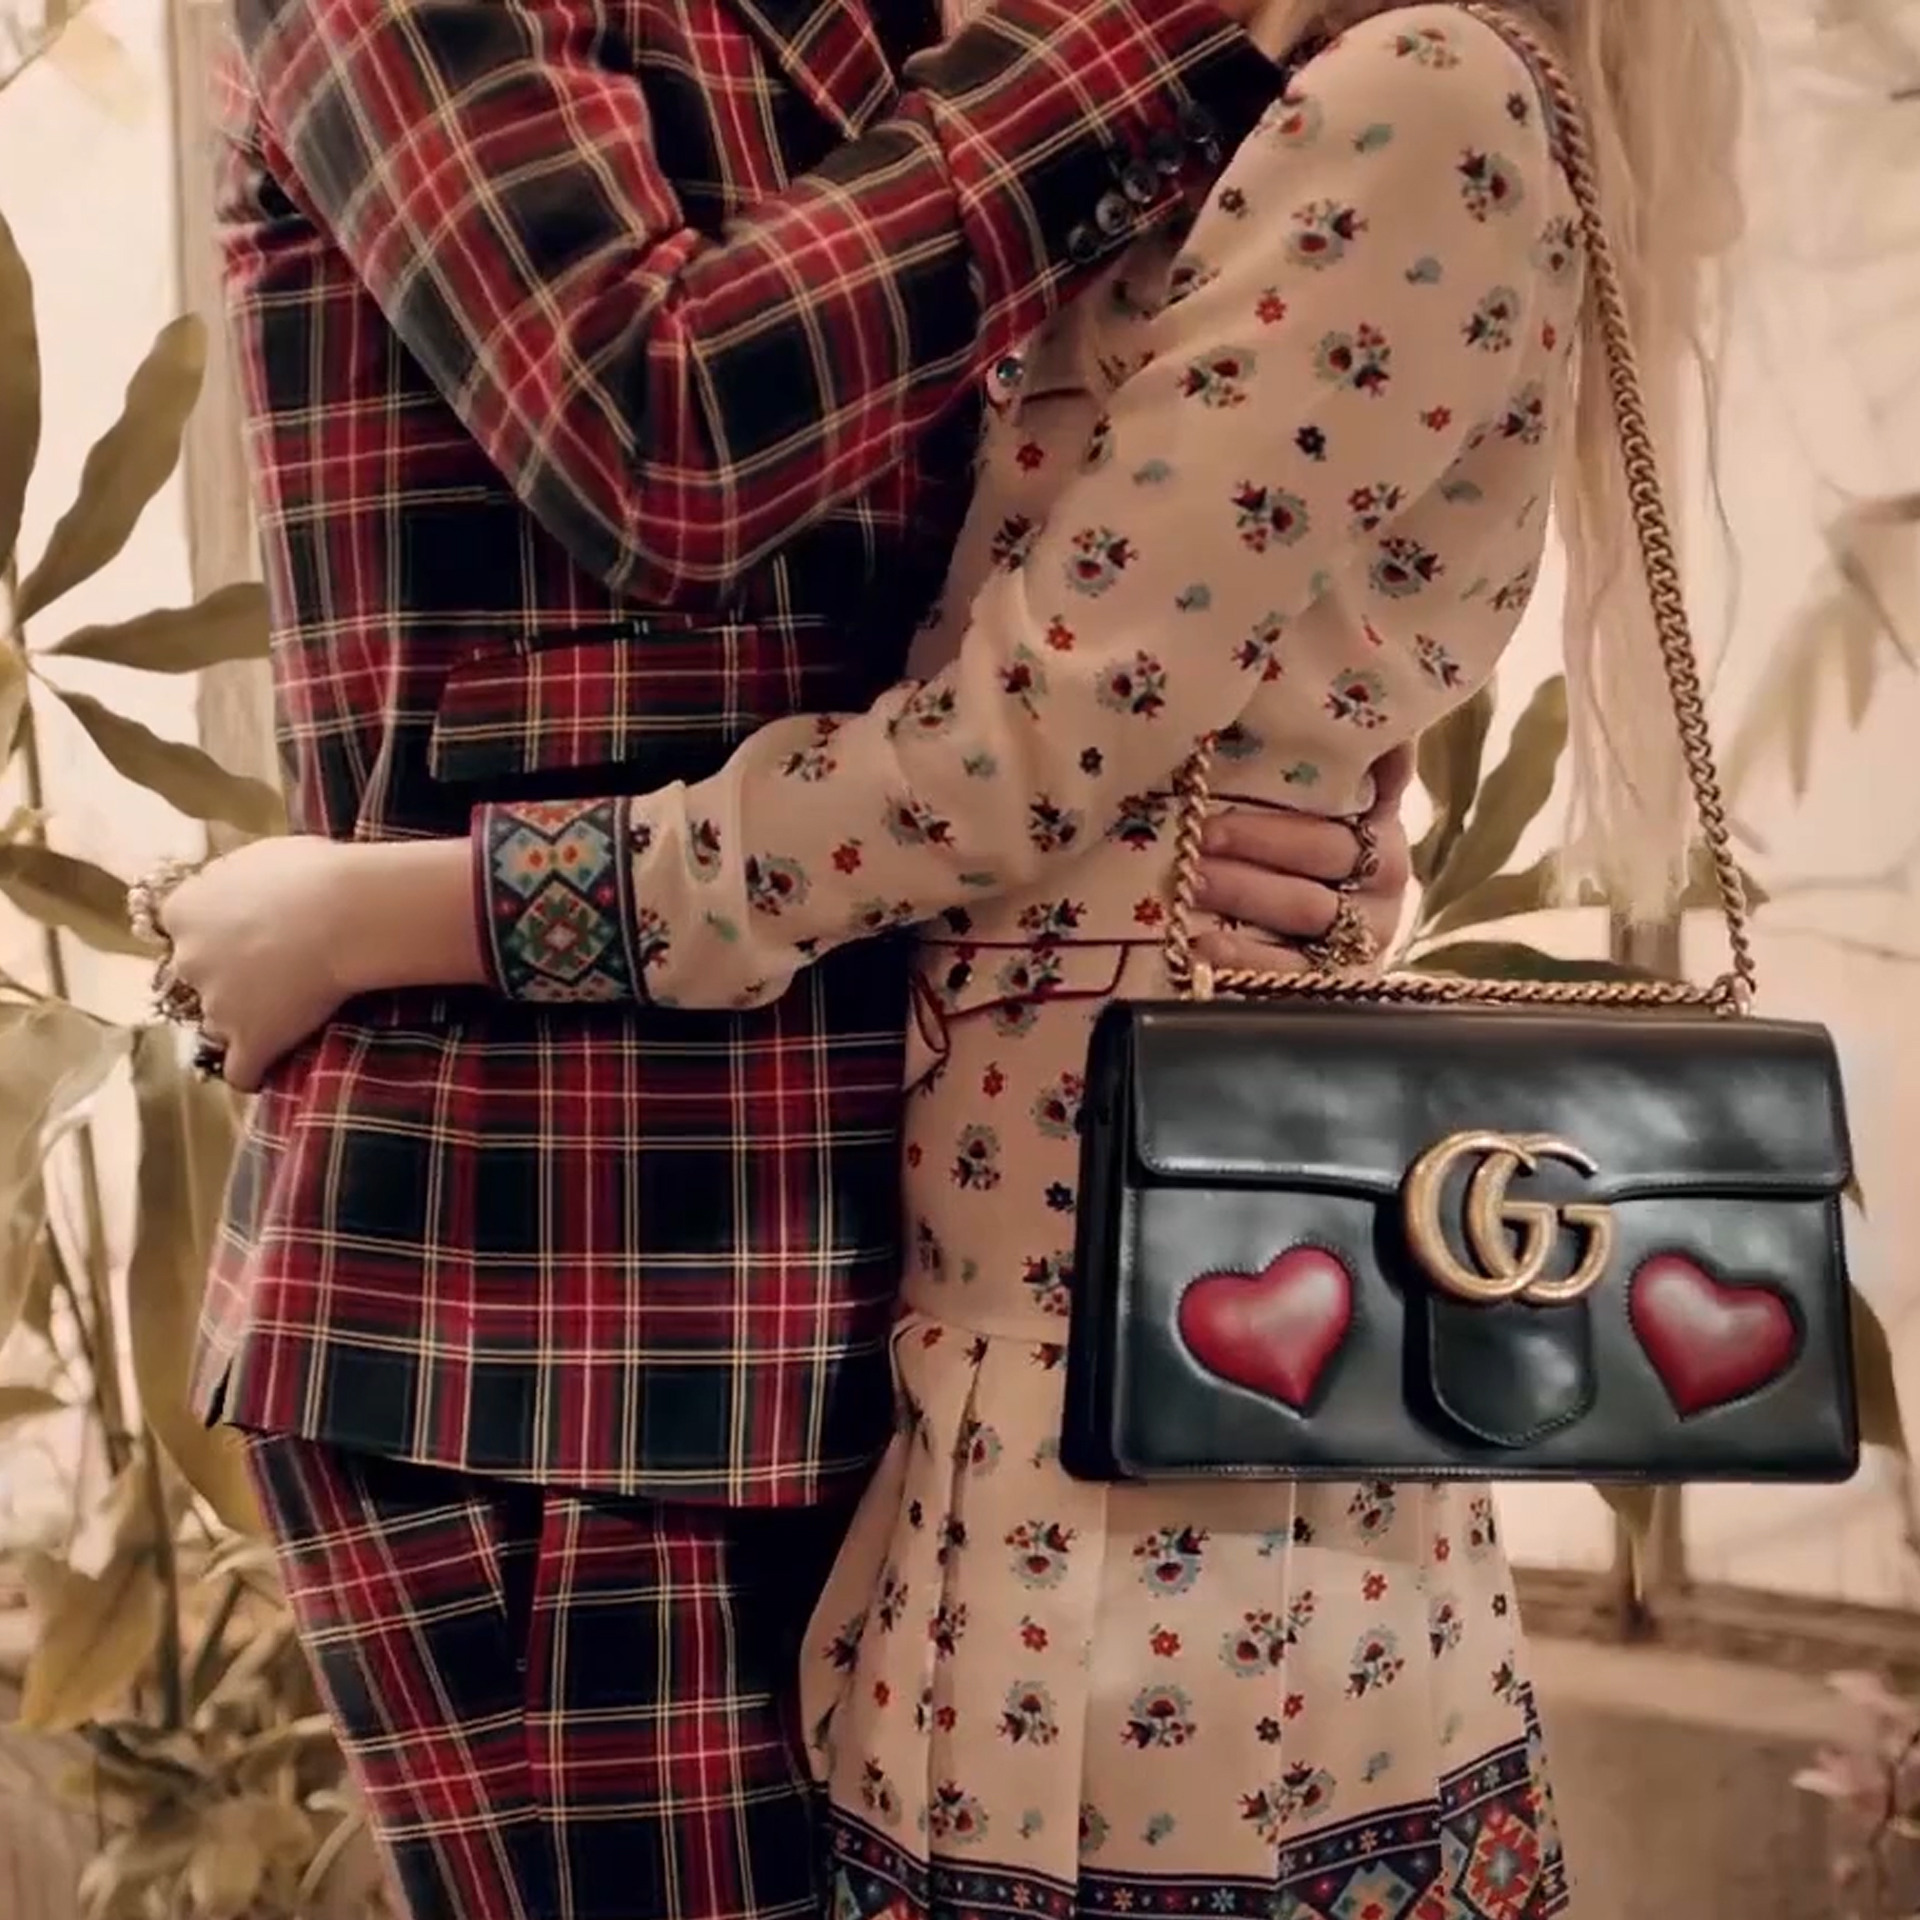 Photo of male and female in Gucci